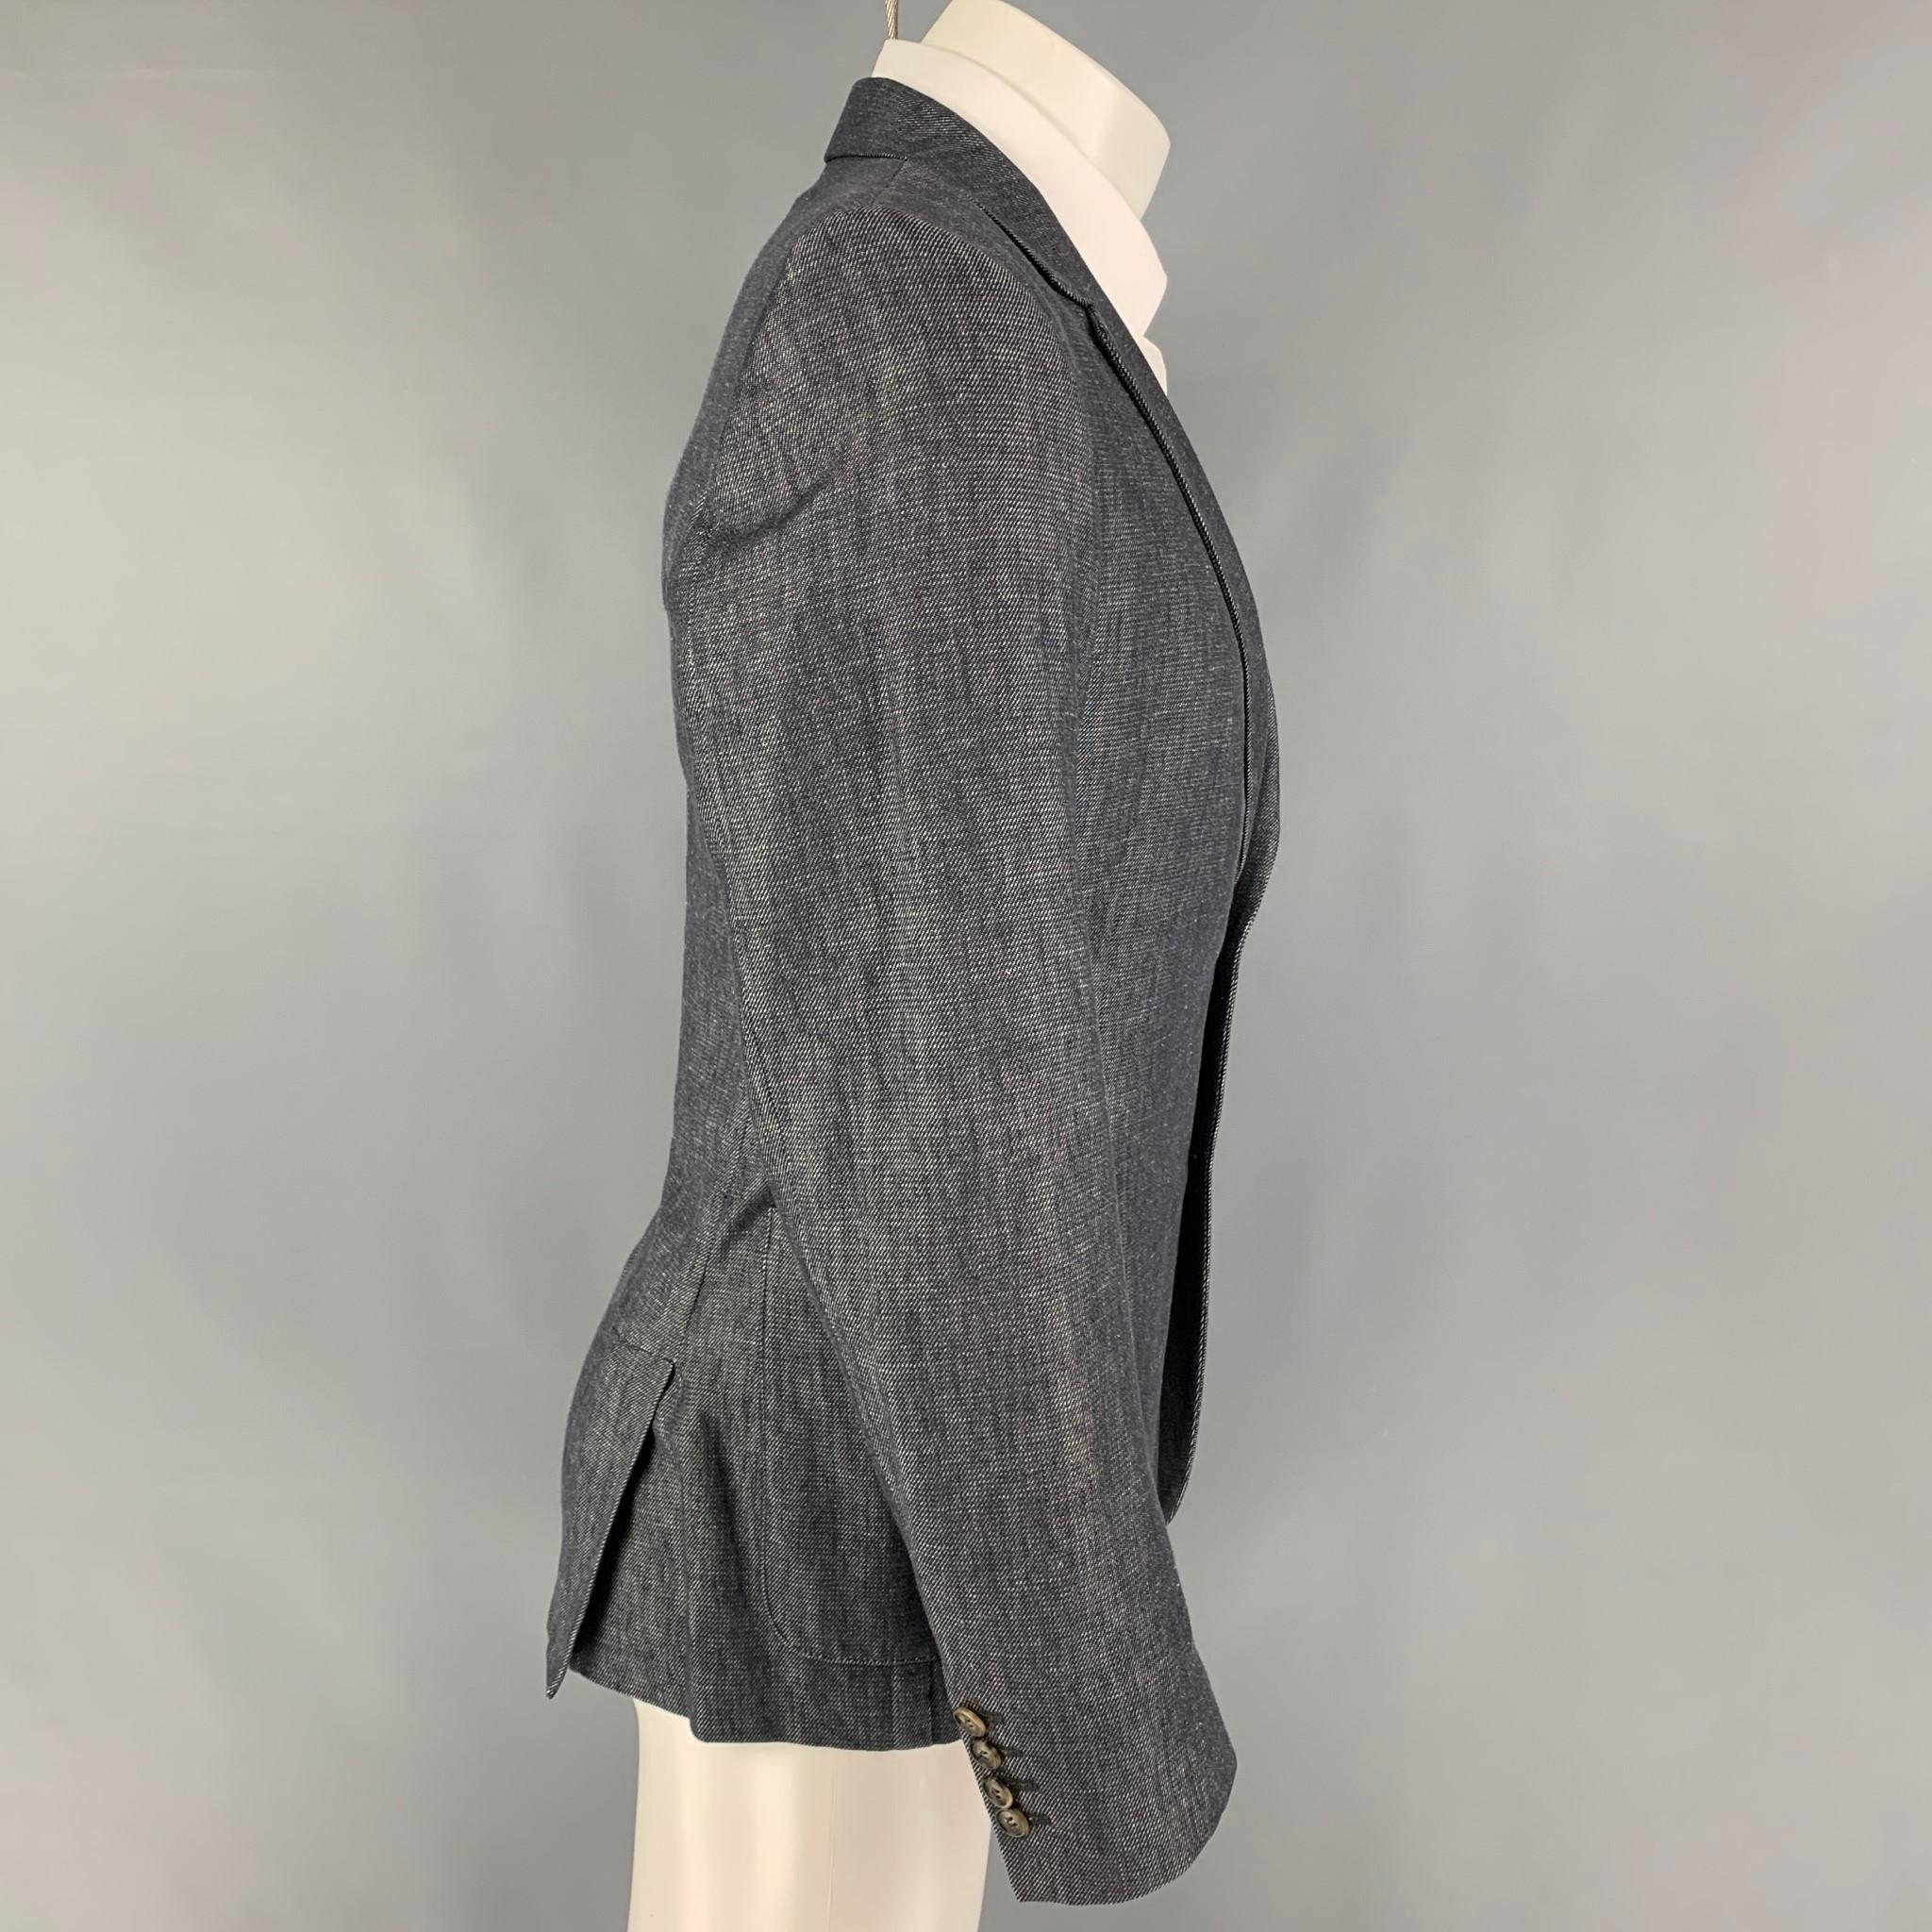 AMI sport coat comes in a indigo & white twill polyamide blend with a half liner featuring a notch lapel, patch pockets, double back vent, and a double button closure. 

Very Good Pre-Owned Condition.
Marked: 52

Measurements:

Shoulder: 17